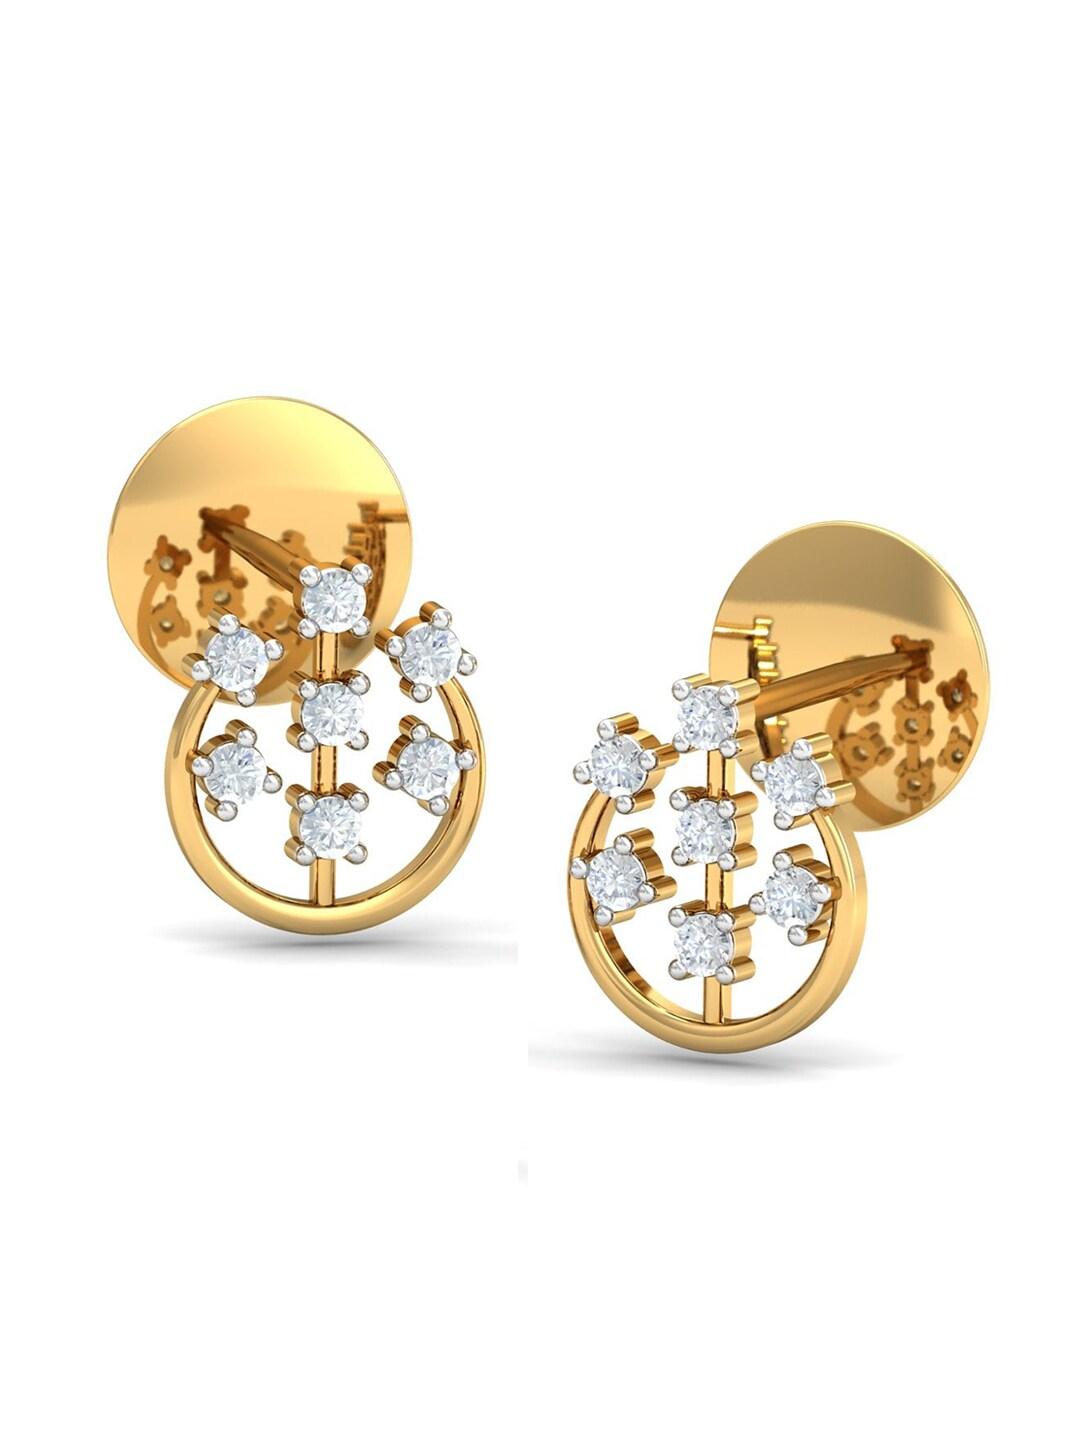 KUBERBOX Floral Charm 18KT Gold Diamond-Studded Earrings- 1.8 gm